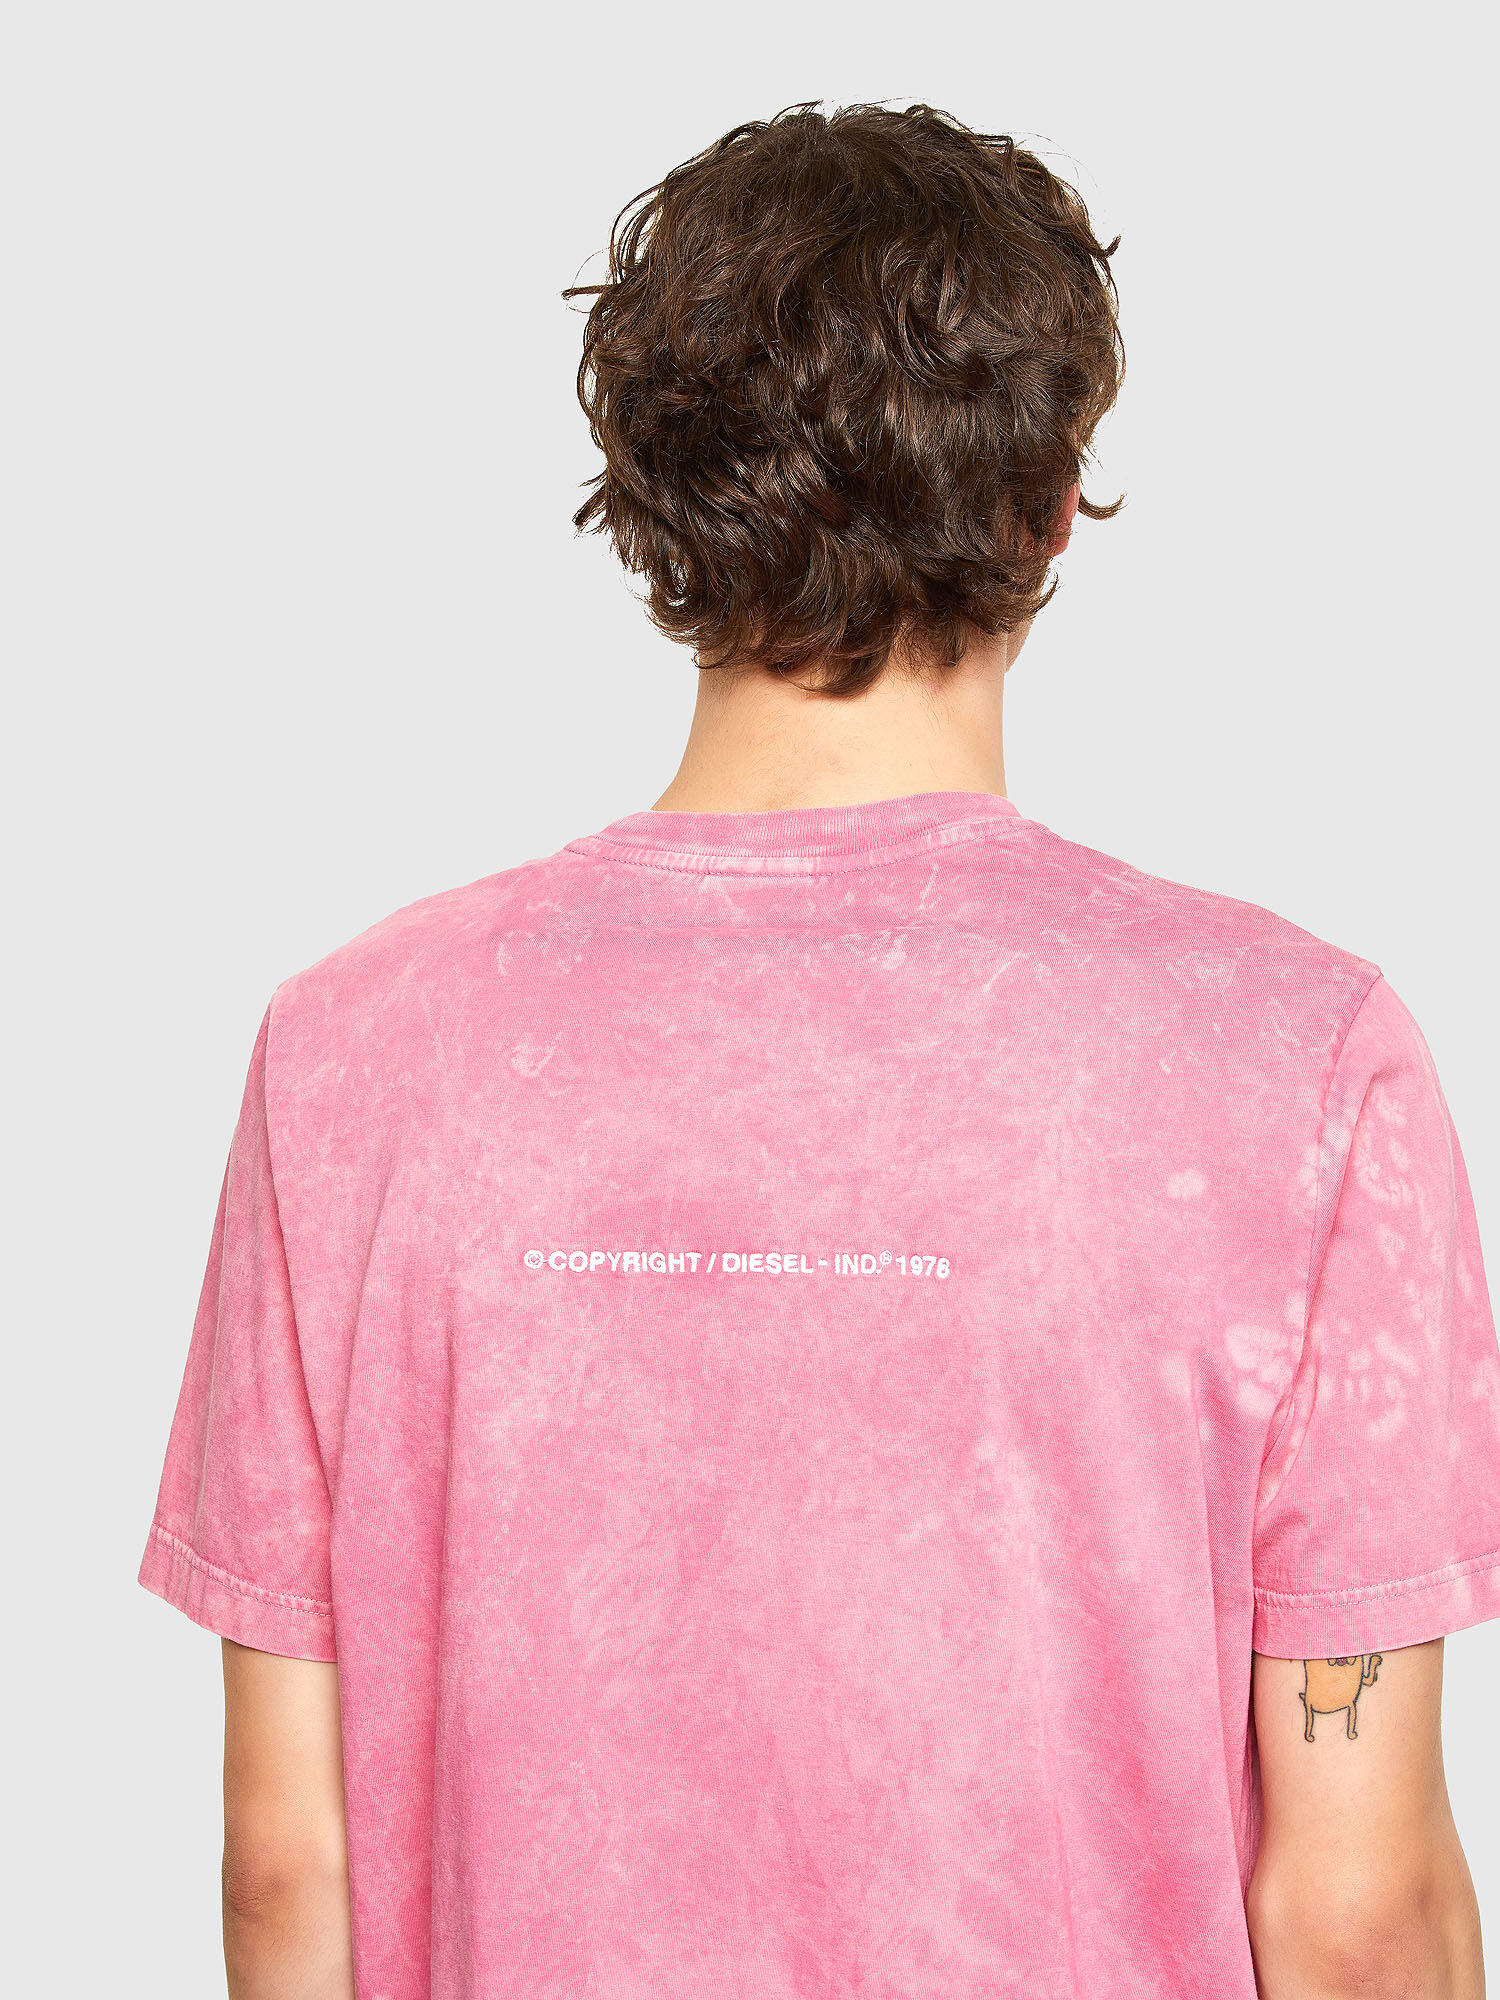 Diesel - T-JUST-E2, Pink - Image 3